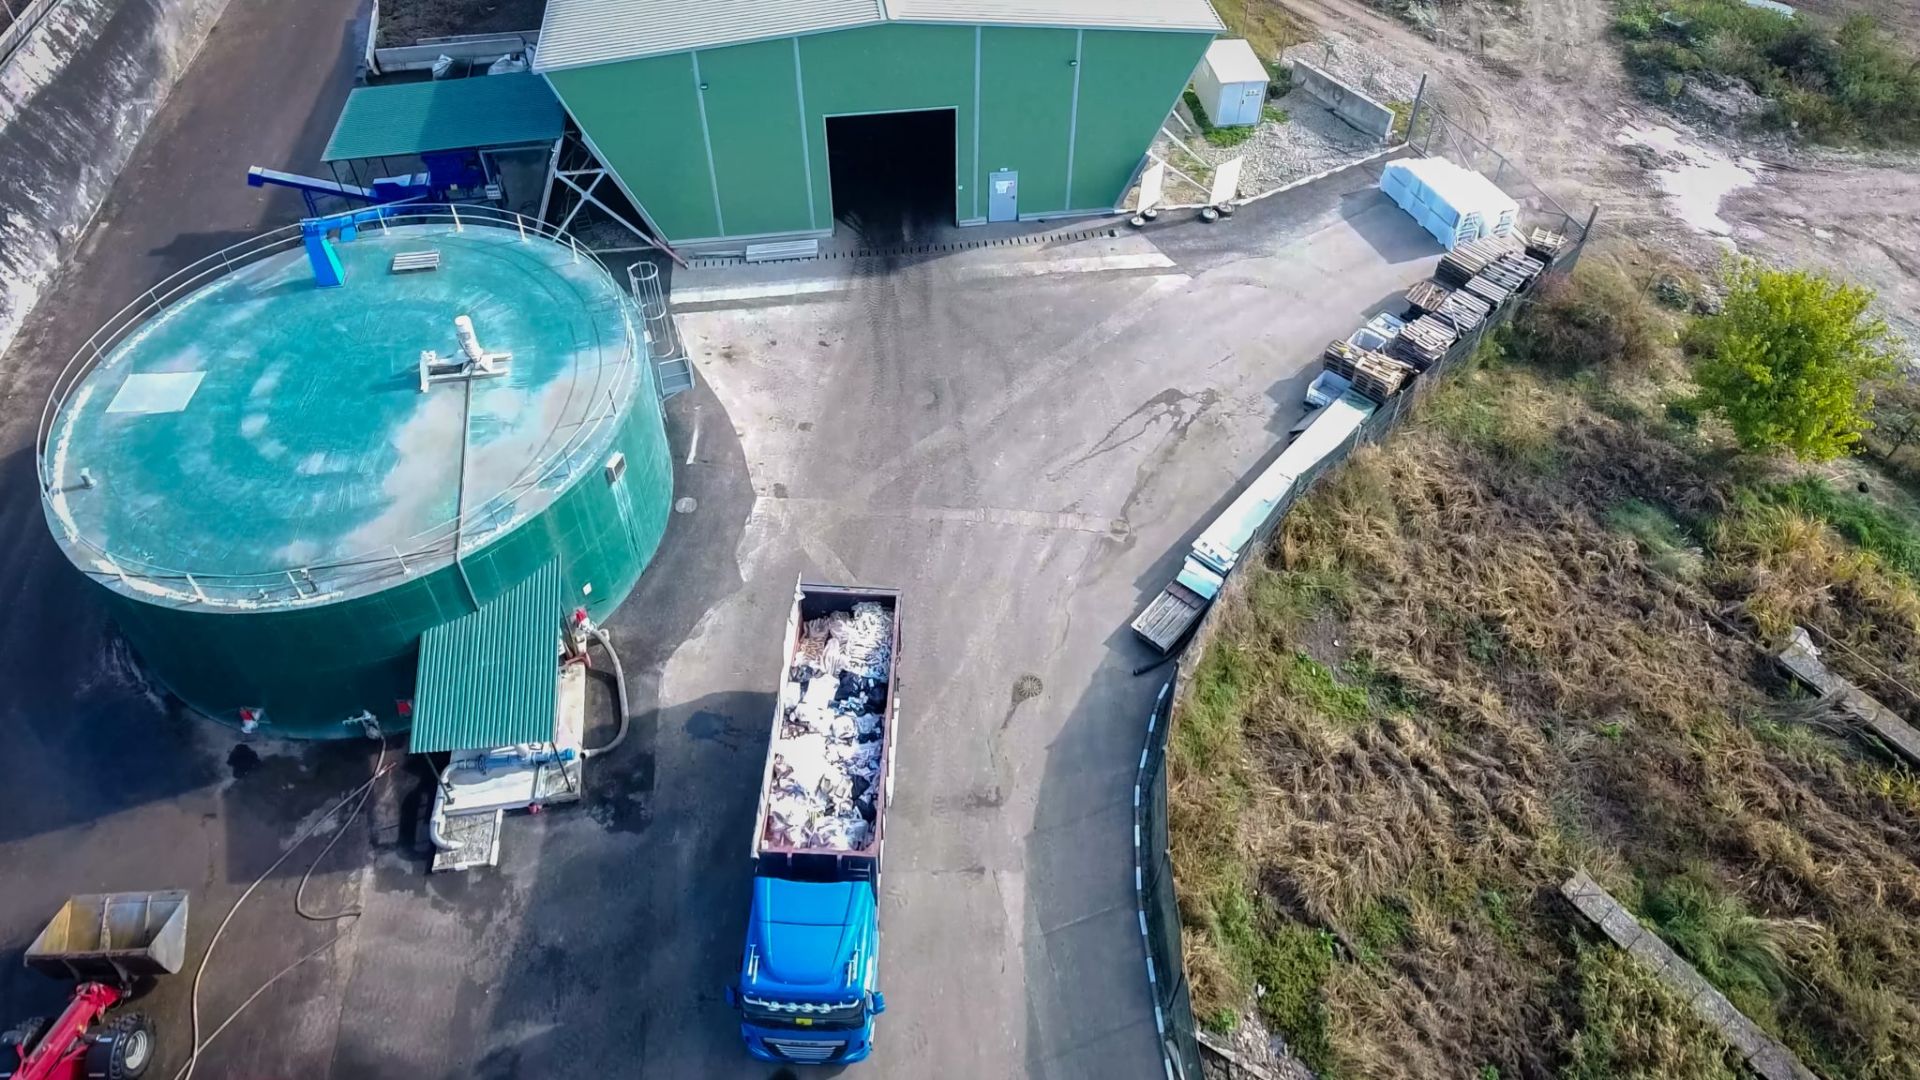 Romania's first biogas power plant, a 5 million euro investment